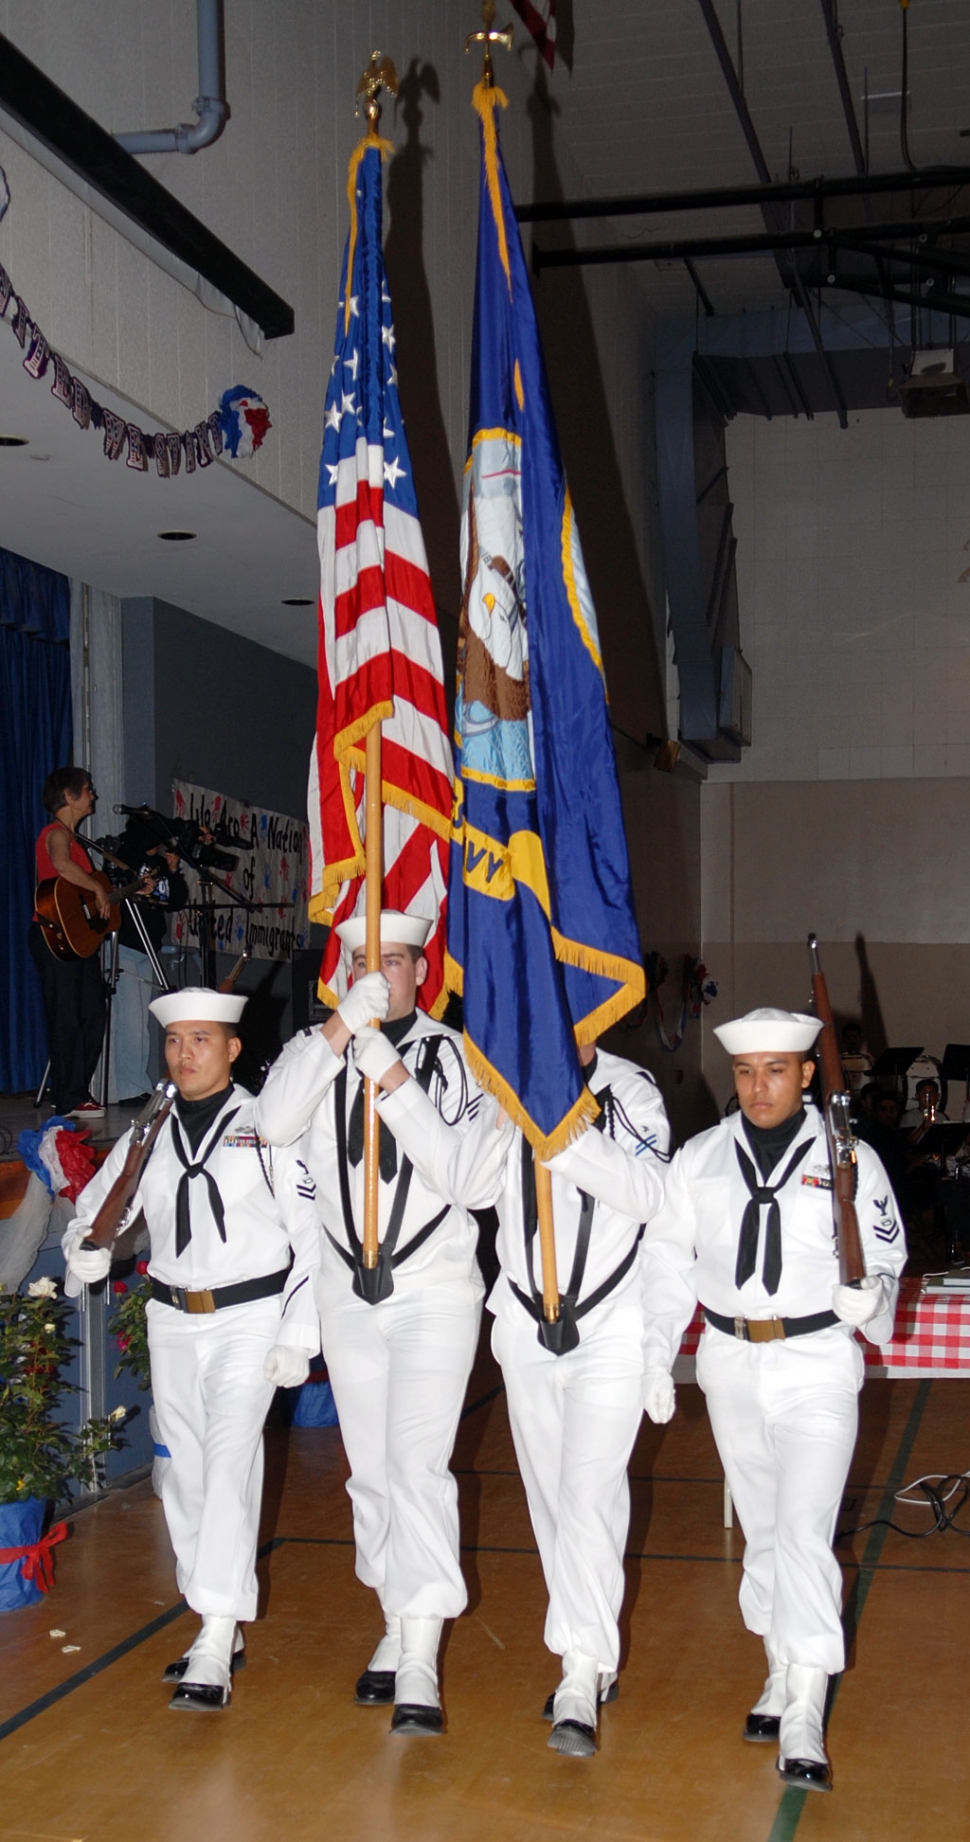 The Navy Honor Guard from Port Hueneme opened ceremonies for Friday’s Pride in America Day at the Fillmore Middle School. The production received high praise this year from retired teacher Mary Ford, who created this day to honor our military men and women more than 10 years ago.